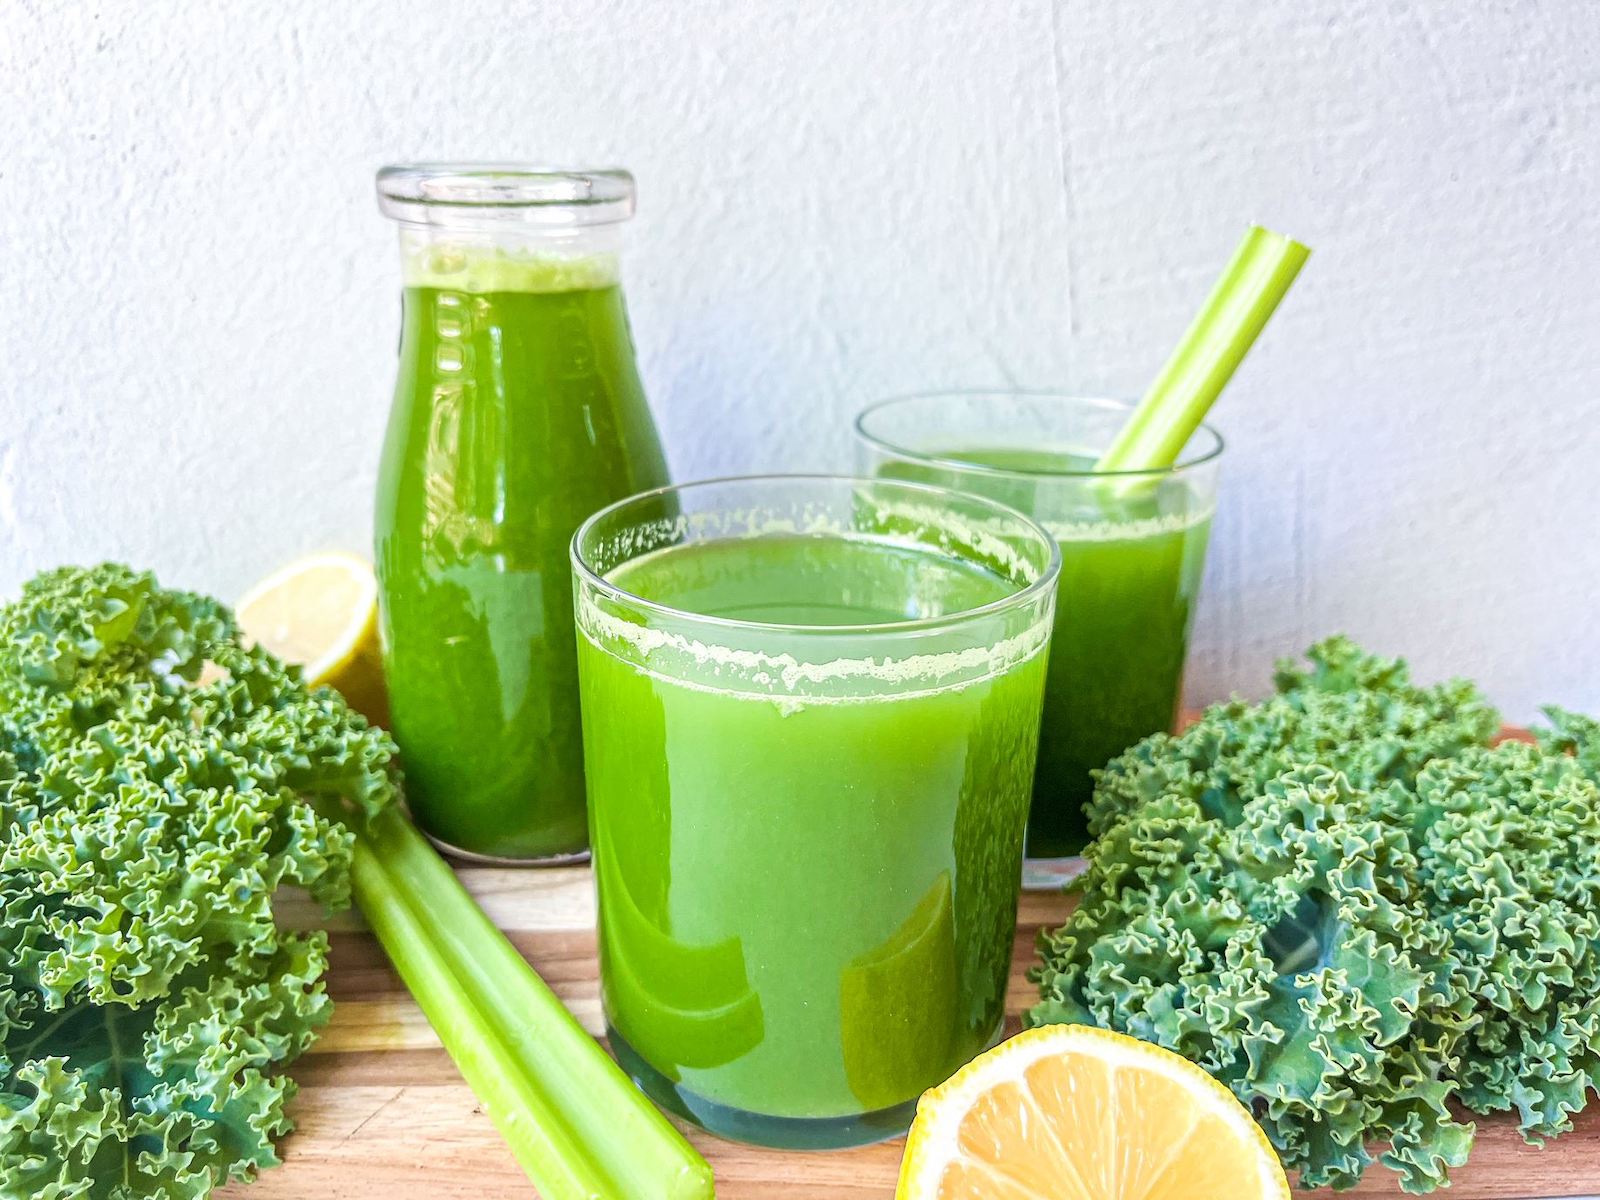 green juice finished with vegetables